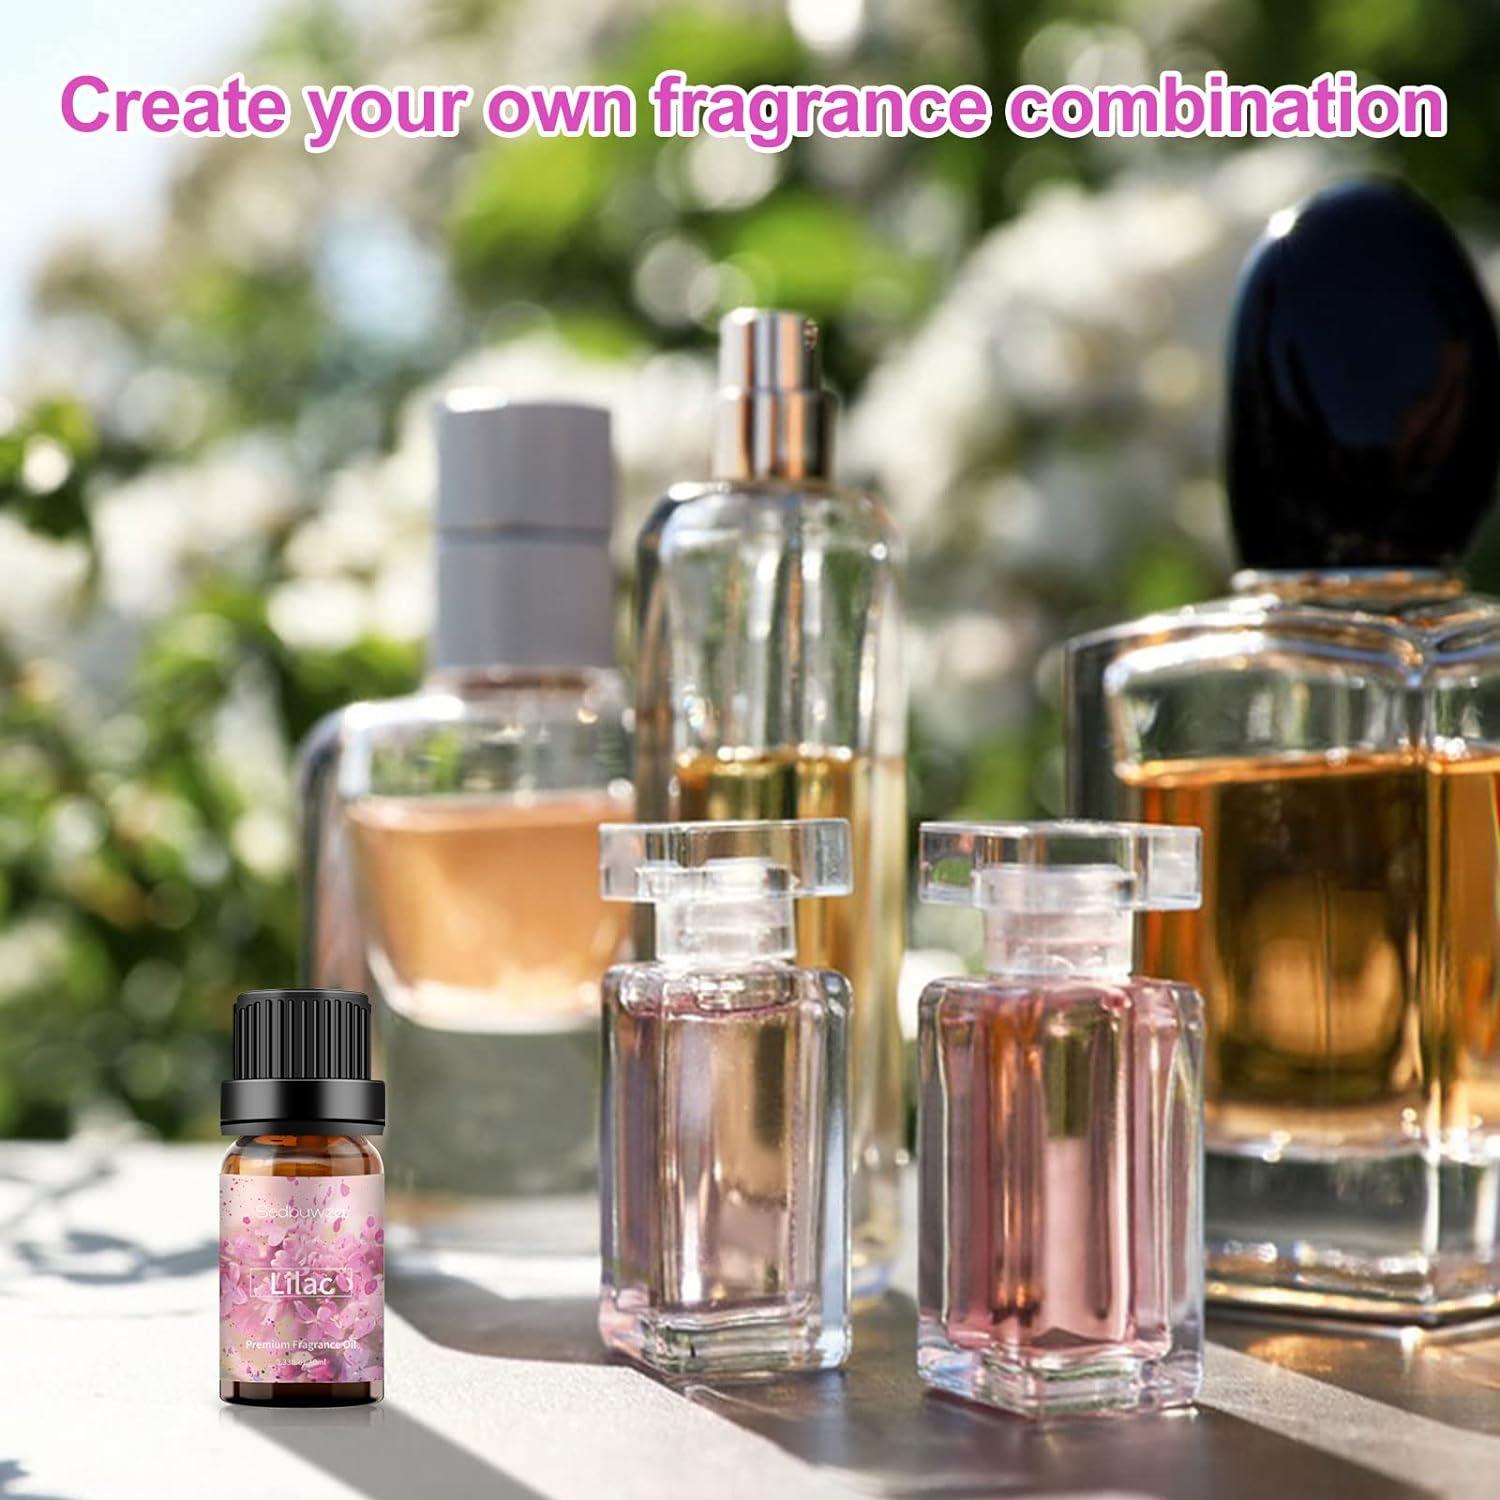 Create Your Own Fragrance with Essential Oils